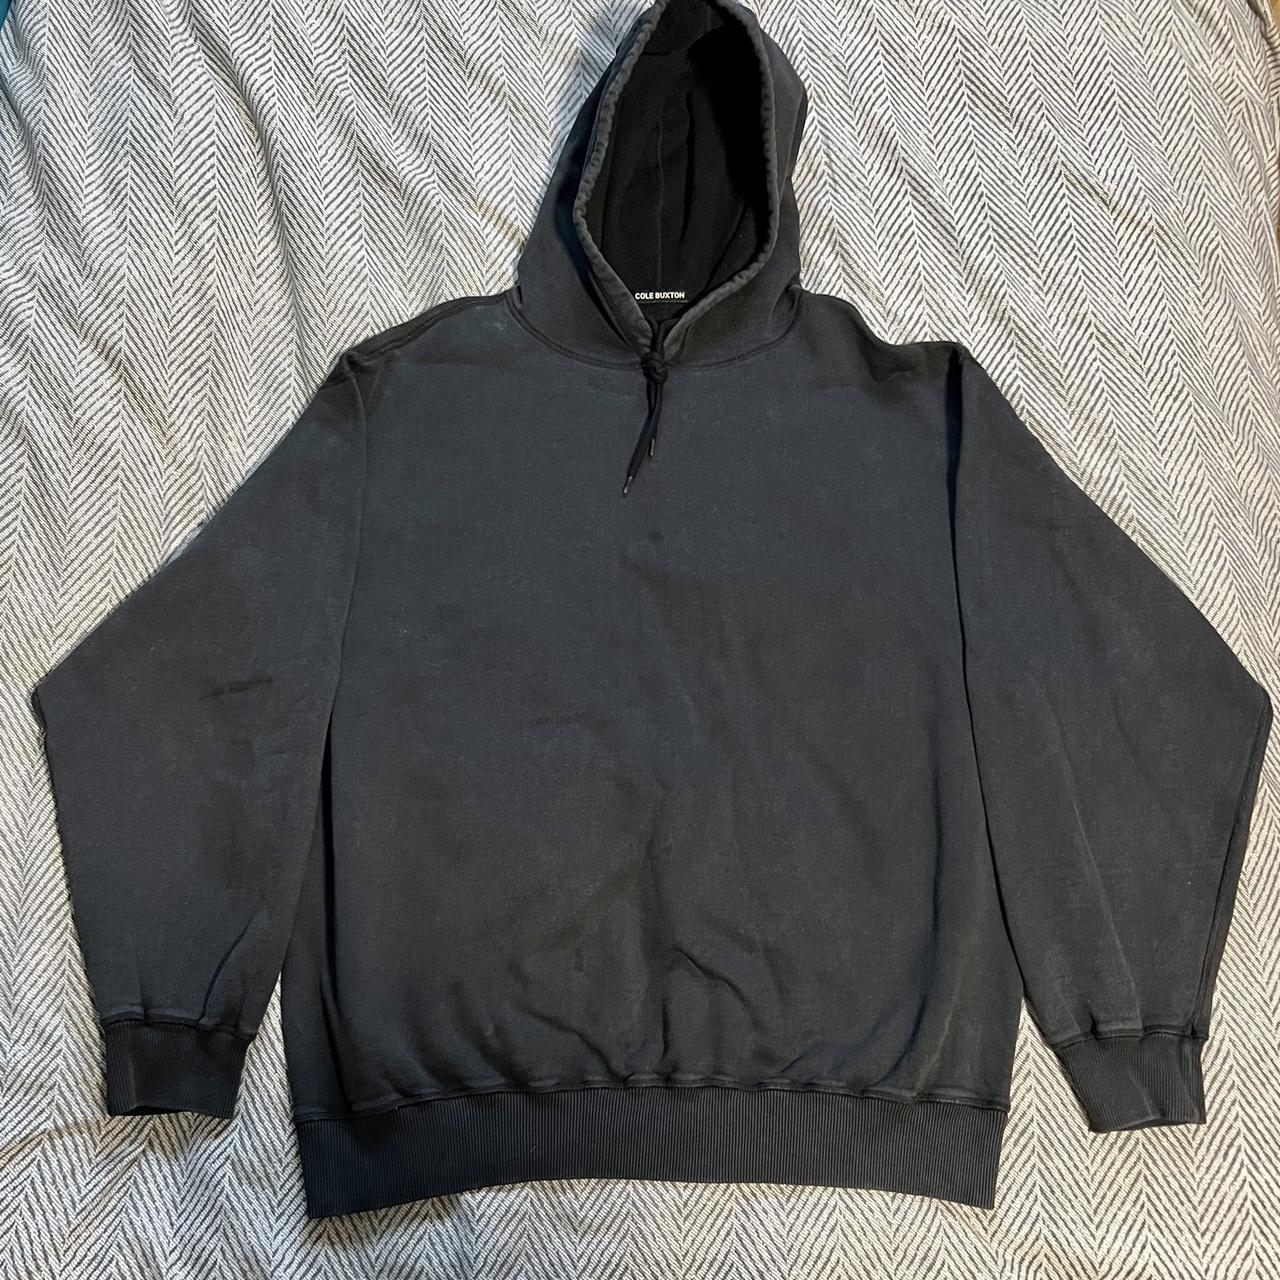 Cole Buxton Classic Warm Up Hoodie in Black. Great... - Depop